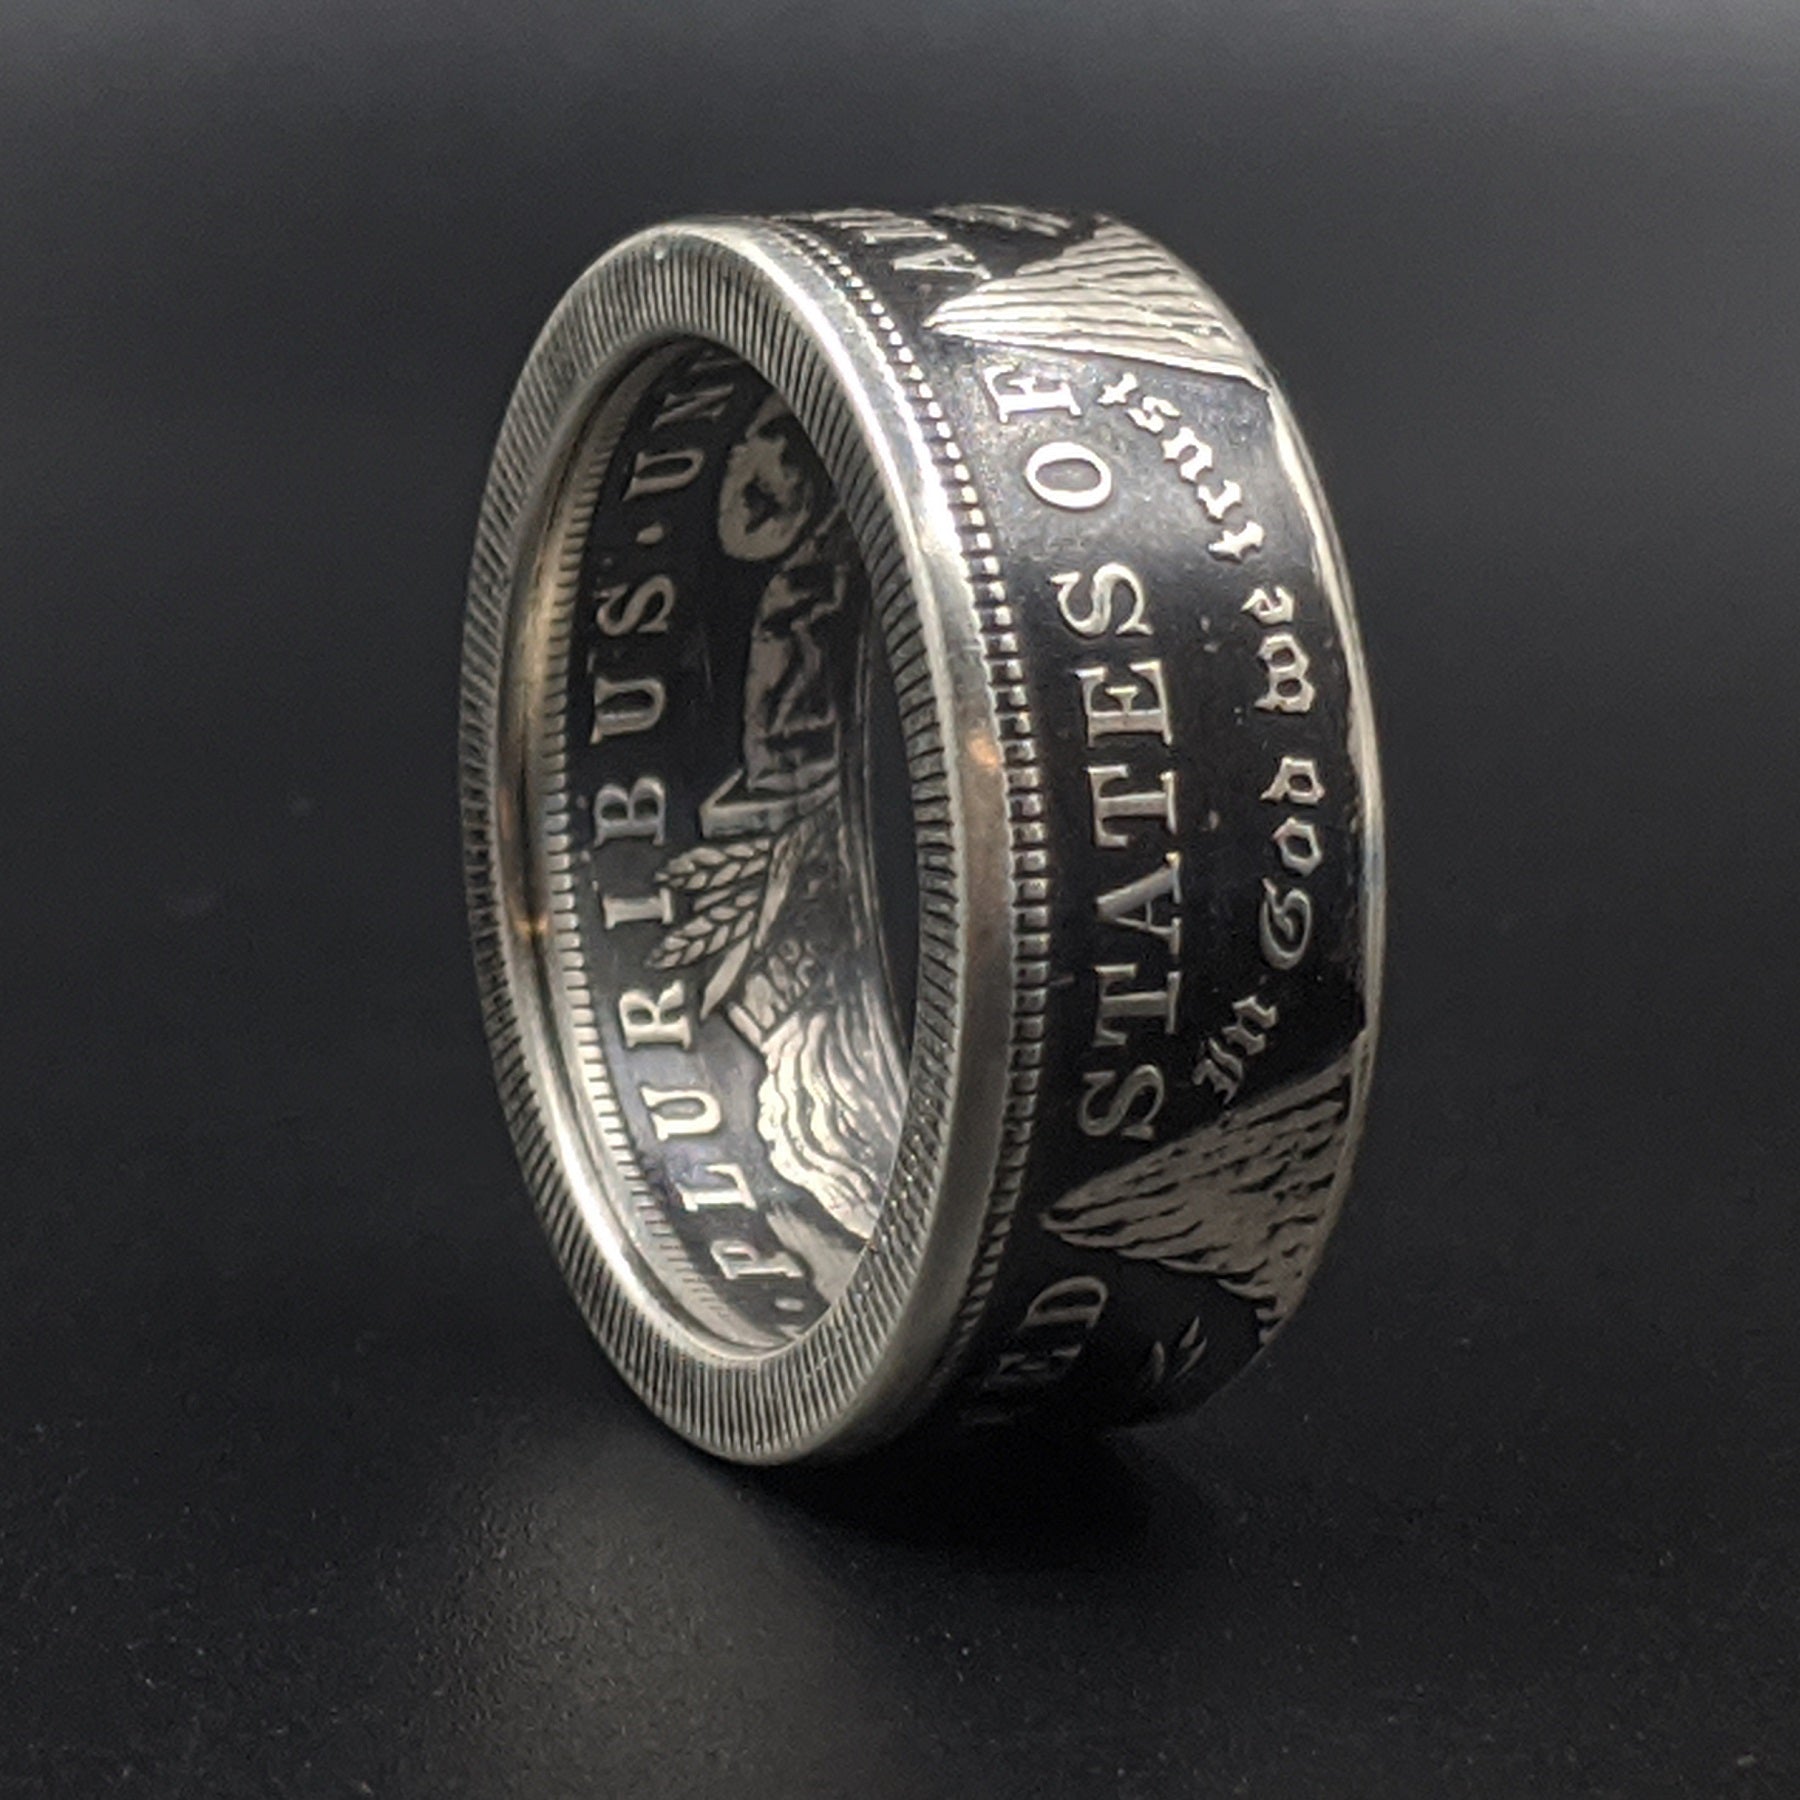 Morgan Silver Dollar Coin Rings | Veteran owned and made in the USA ...